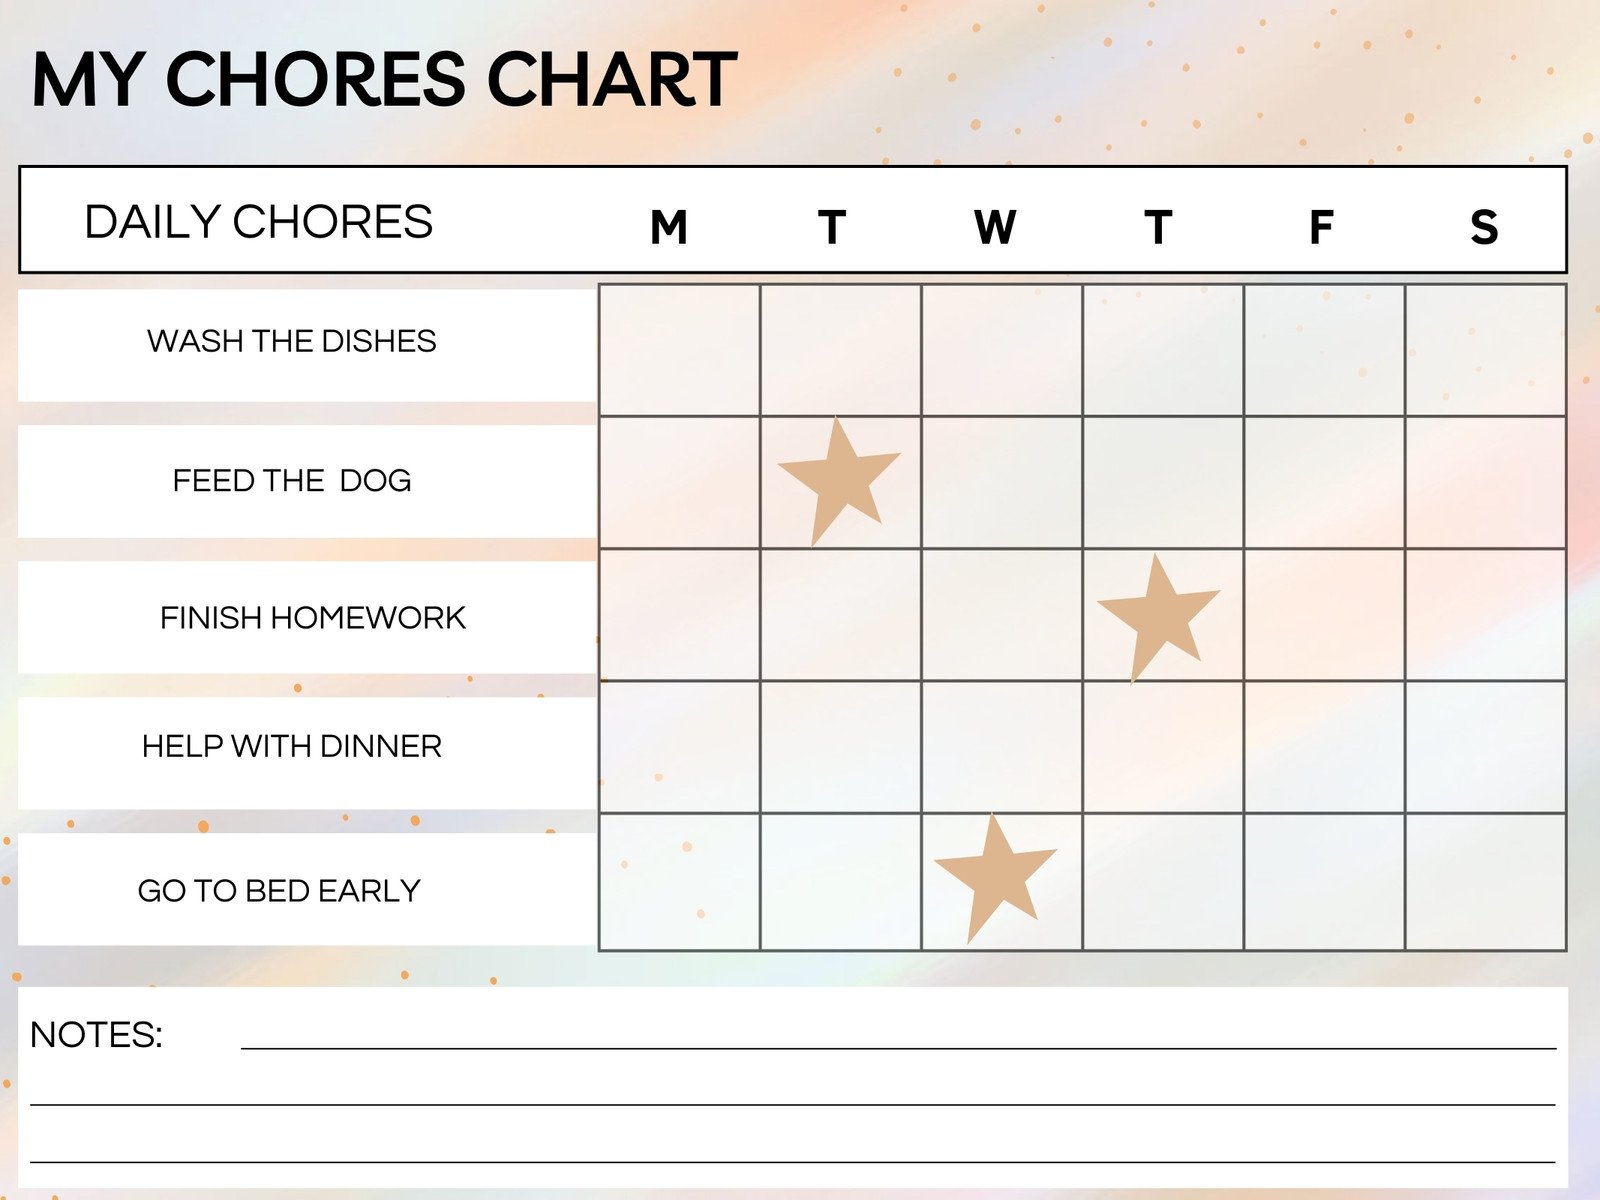 Free Family Chore Chart Templates - With the Huddlestons